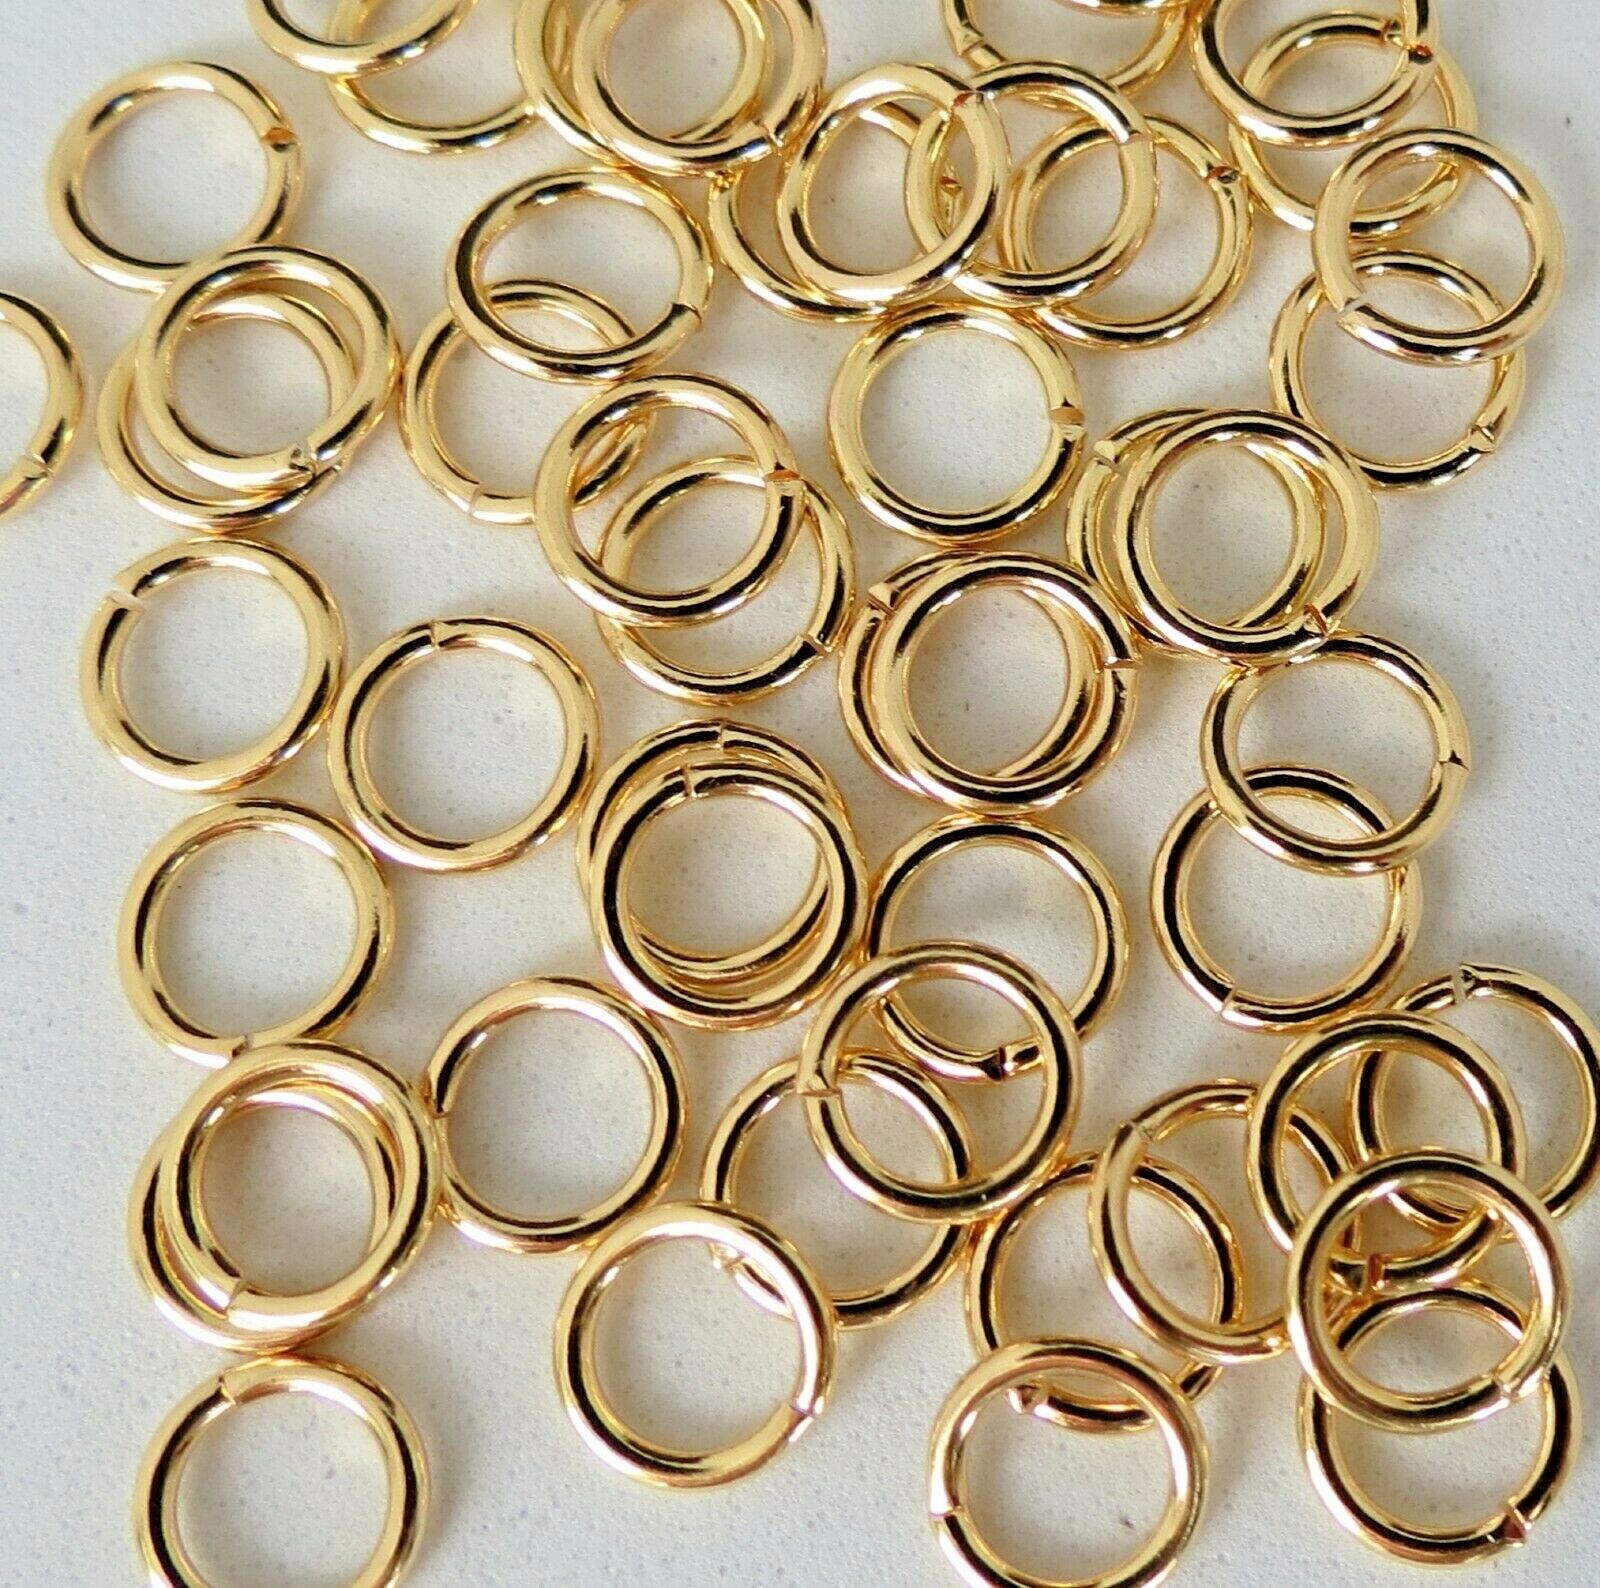 7mm 100 Pack NO SOLDER MAGIC JUMP RINGS gold plate 18 Gauge for jewelry charms Unbranded